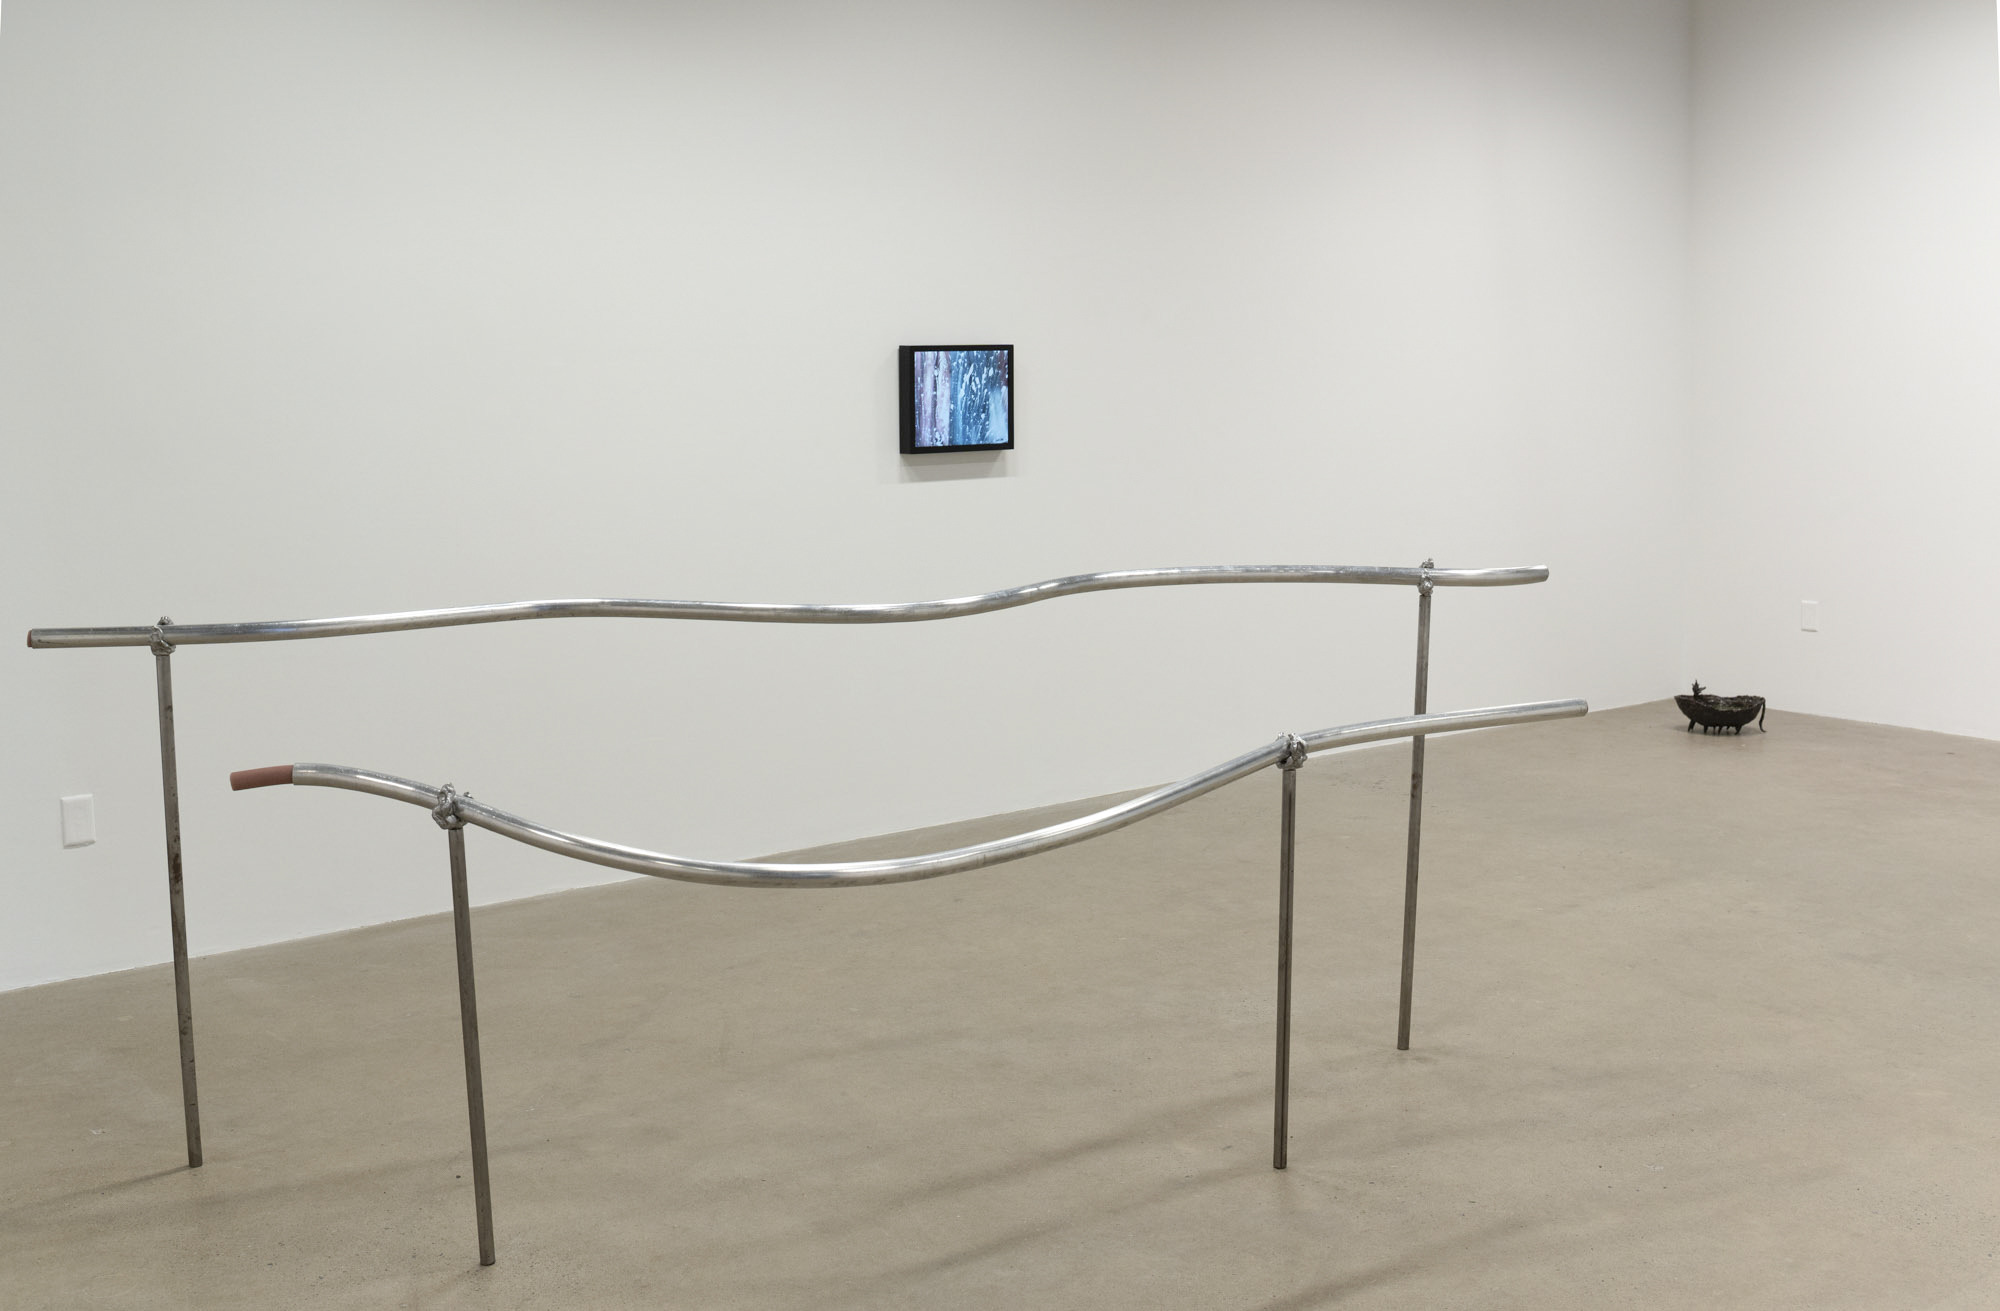 A gallery with concrete floors and white walls. A metal handrail sculpture is in the foreground. A monitor on the wall behind it shows a video work and a fountain sculpture in the far corner.